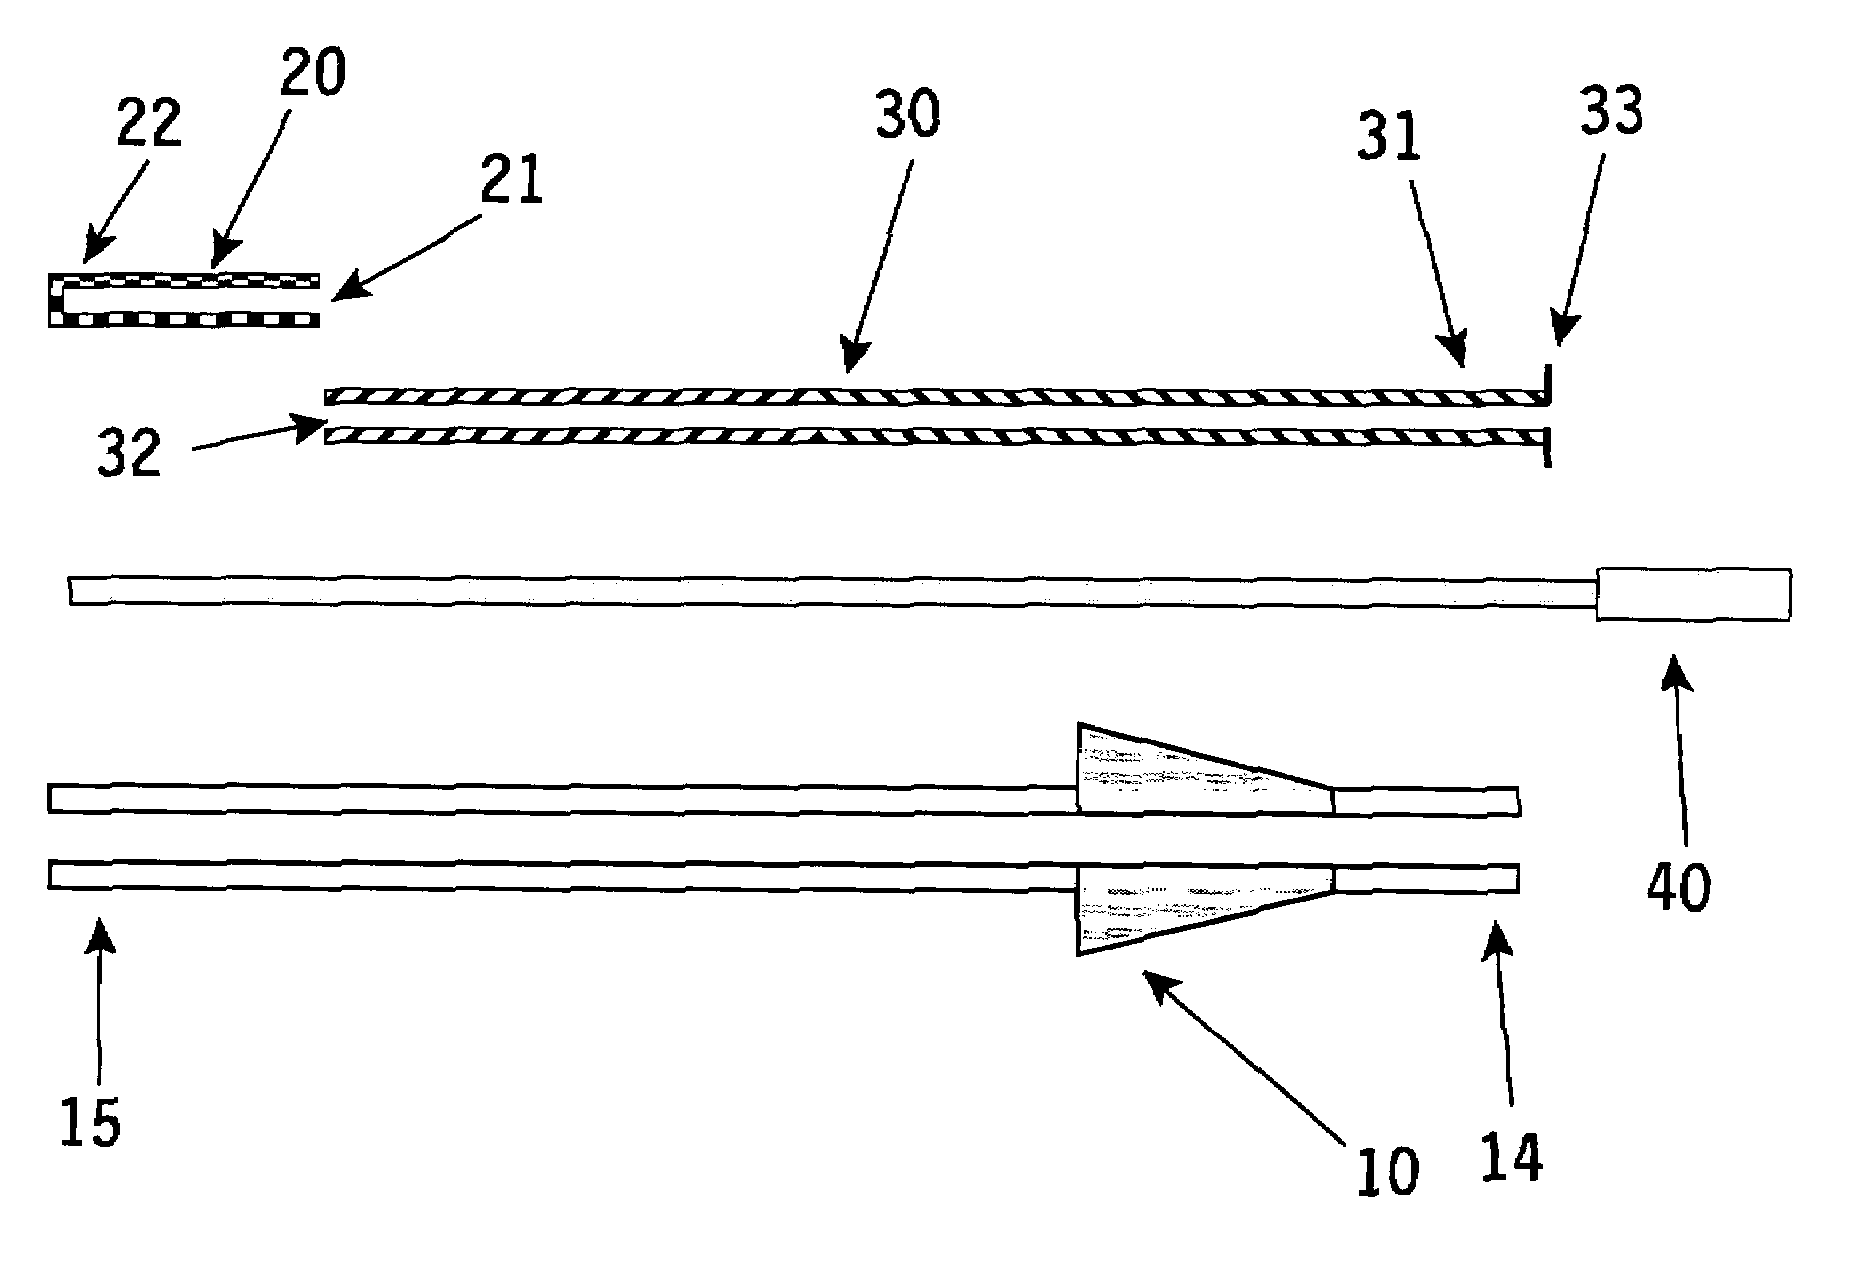 Device for implanting a row of radioactive seeds and non-radioactive spacers in an animal body